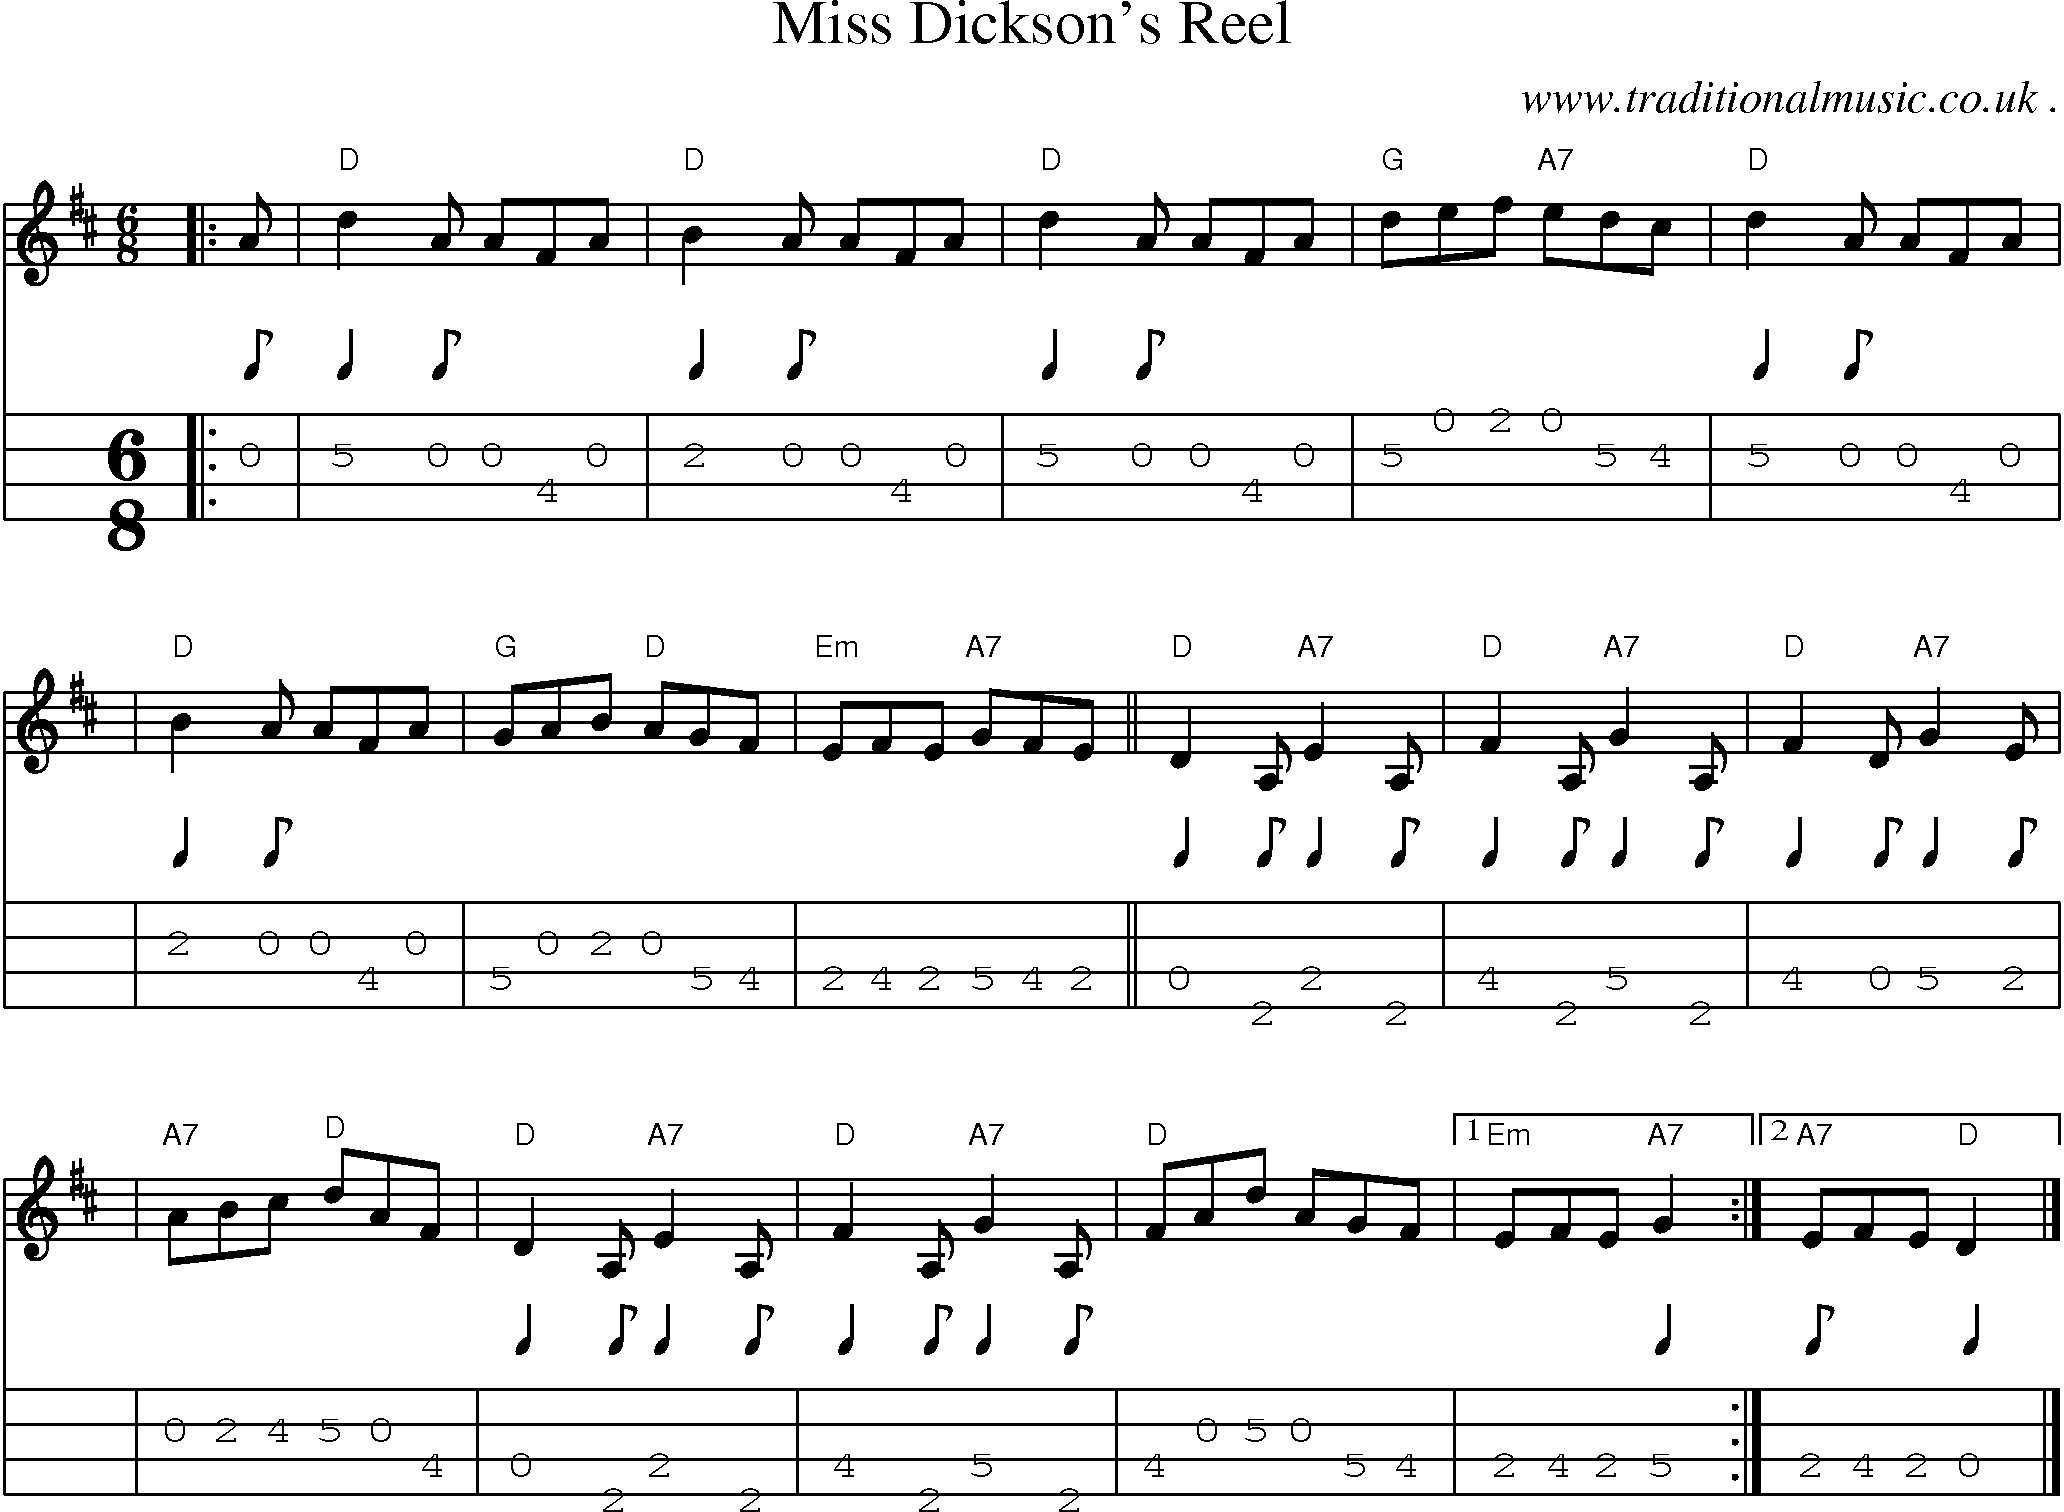 Sheet-music  score, Chords and Mandolin Tabs for Miss Dicksons Reel